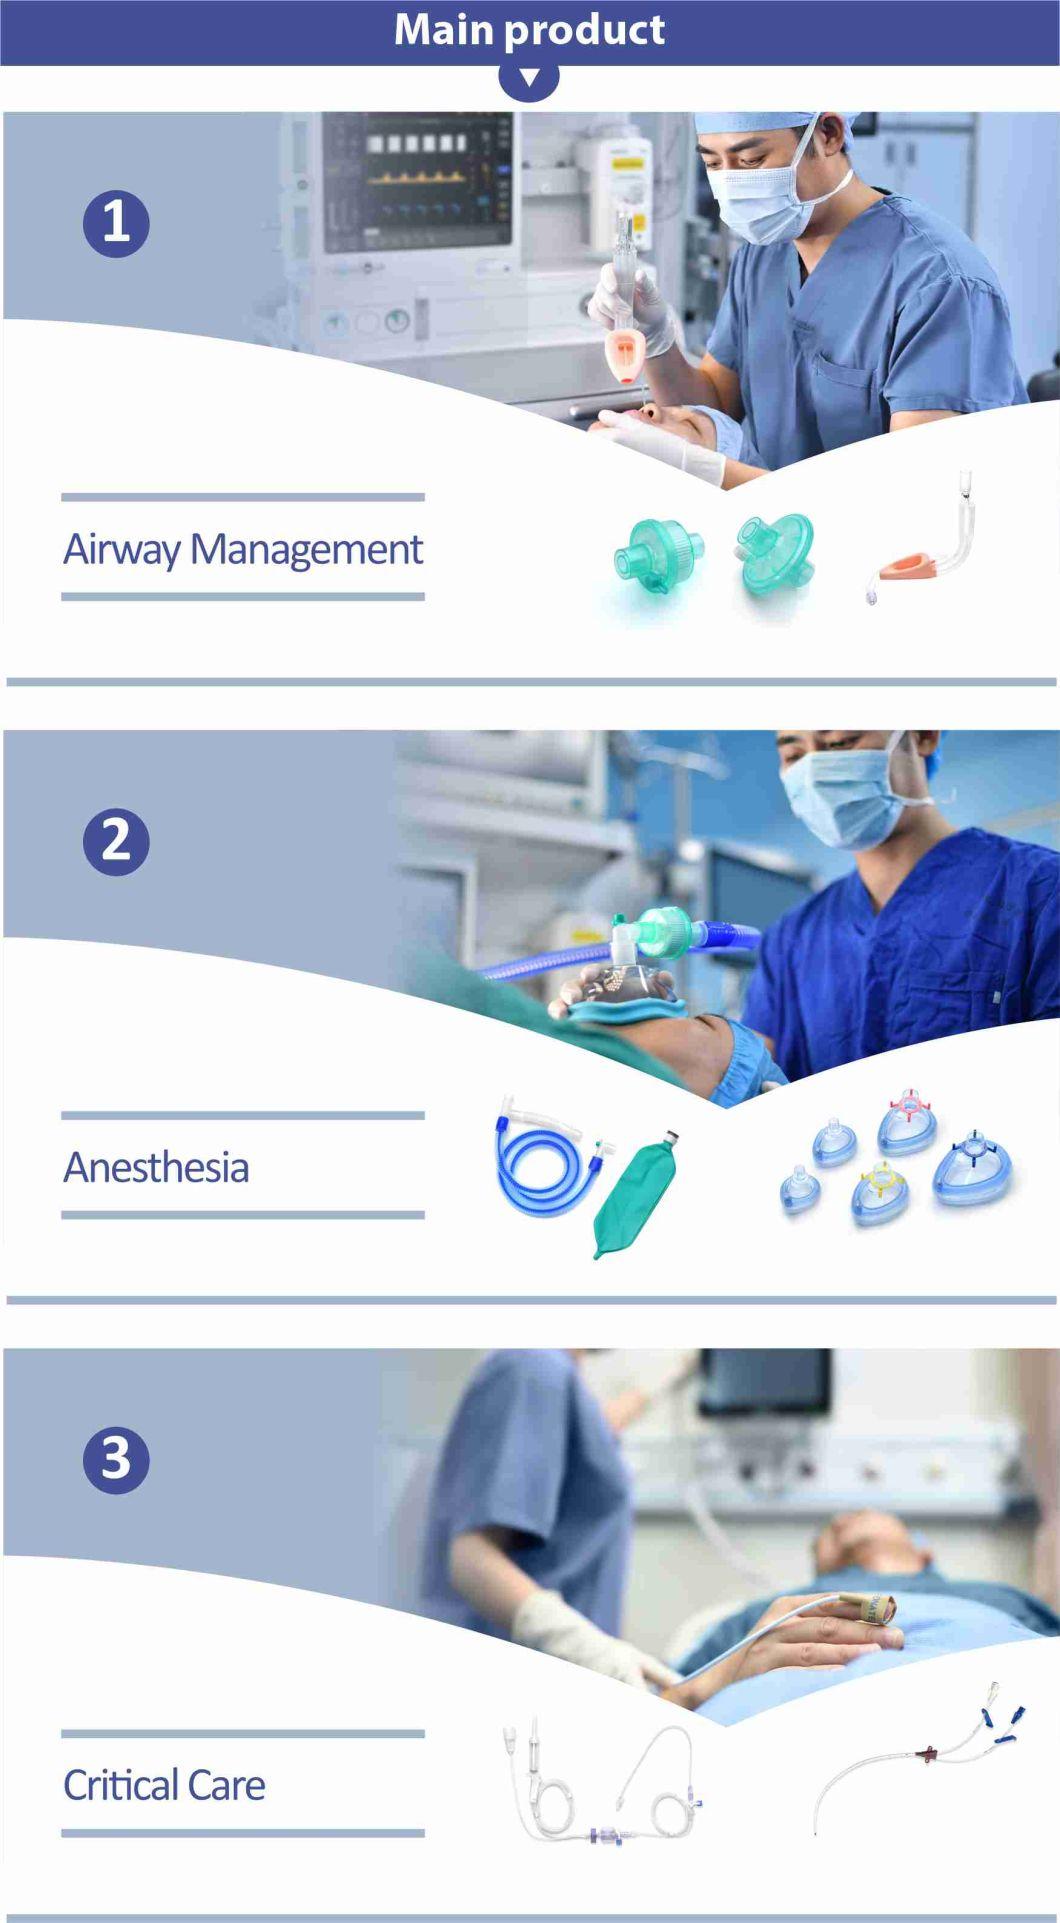 Dlm2.5 Disposable Laryngeal Mask Airway (Classic)